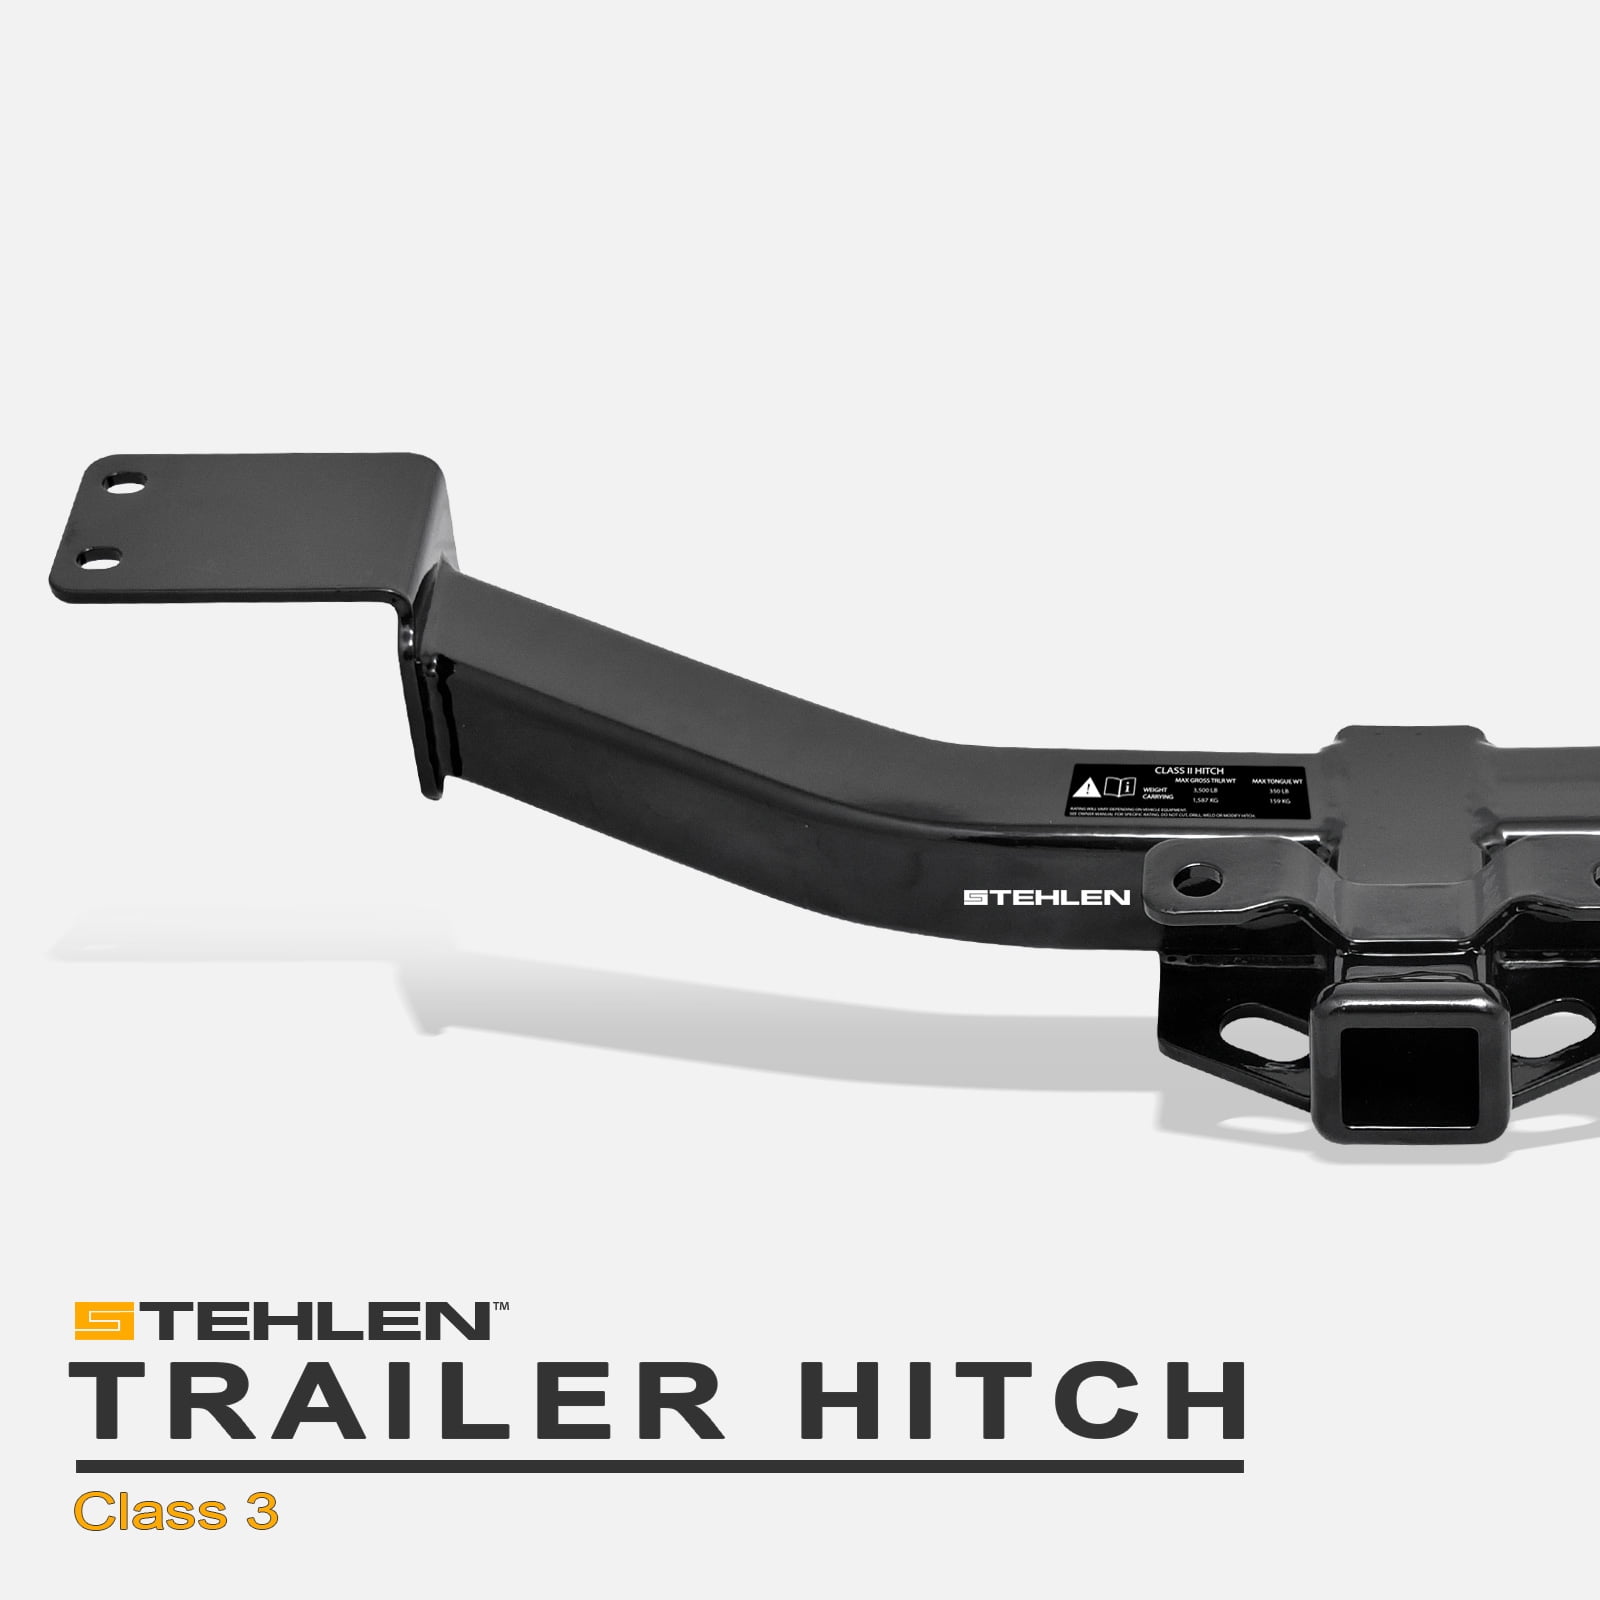 Stehlen 733469487784 Class 3 Trailer Tow Hitch Receiver 2" For 2007-2016 GMC Acadia / 2017 2016 Gmc Acadia Denali Trailer Hitch Cover